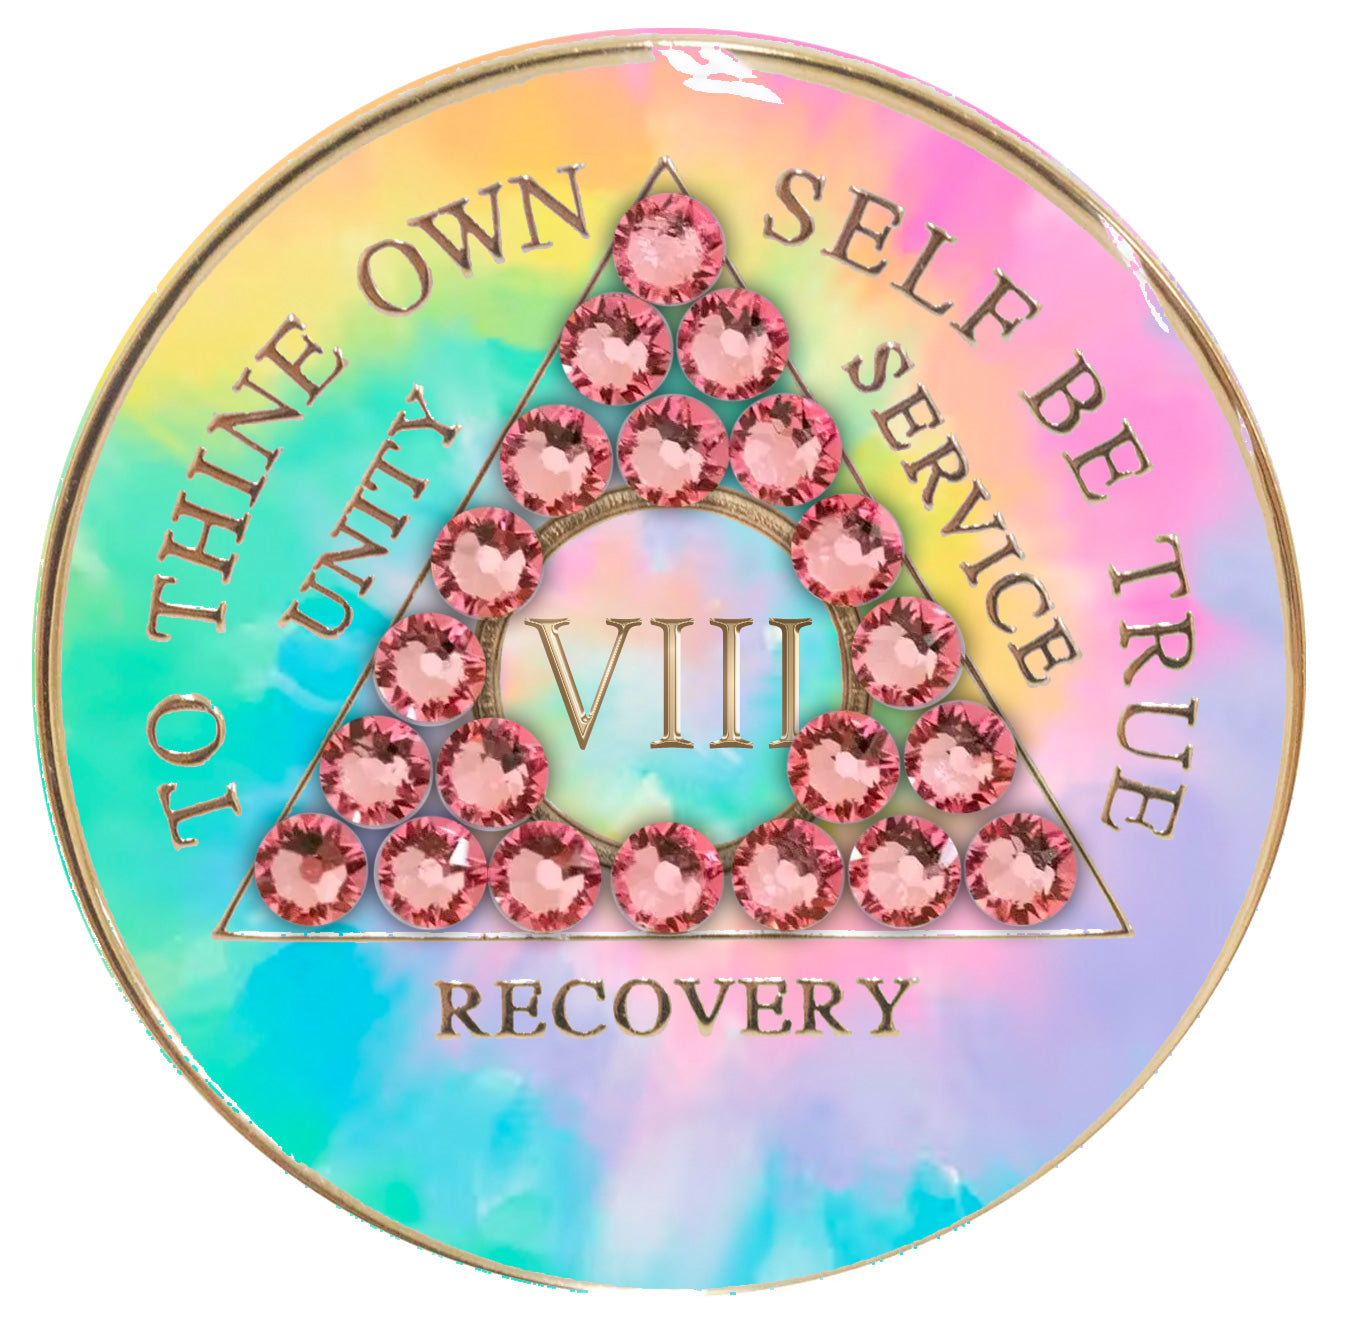 8 year AA medallion pastel tie-dye representing a psychic change that is needed in the recovery journey, with twenty-one light rose genuine crystals, pink, blue, yellow, and green, in the shape of the triangle, with the AA moto and roman numeral embossed in 14k gold-plated brass, the medallion is sealed with resin for a glossy, scratch free finish.